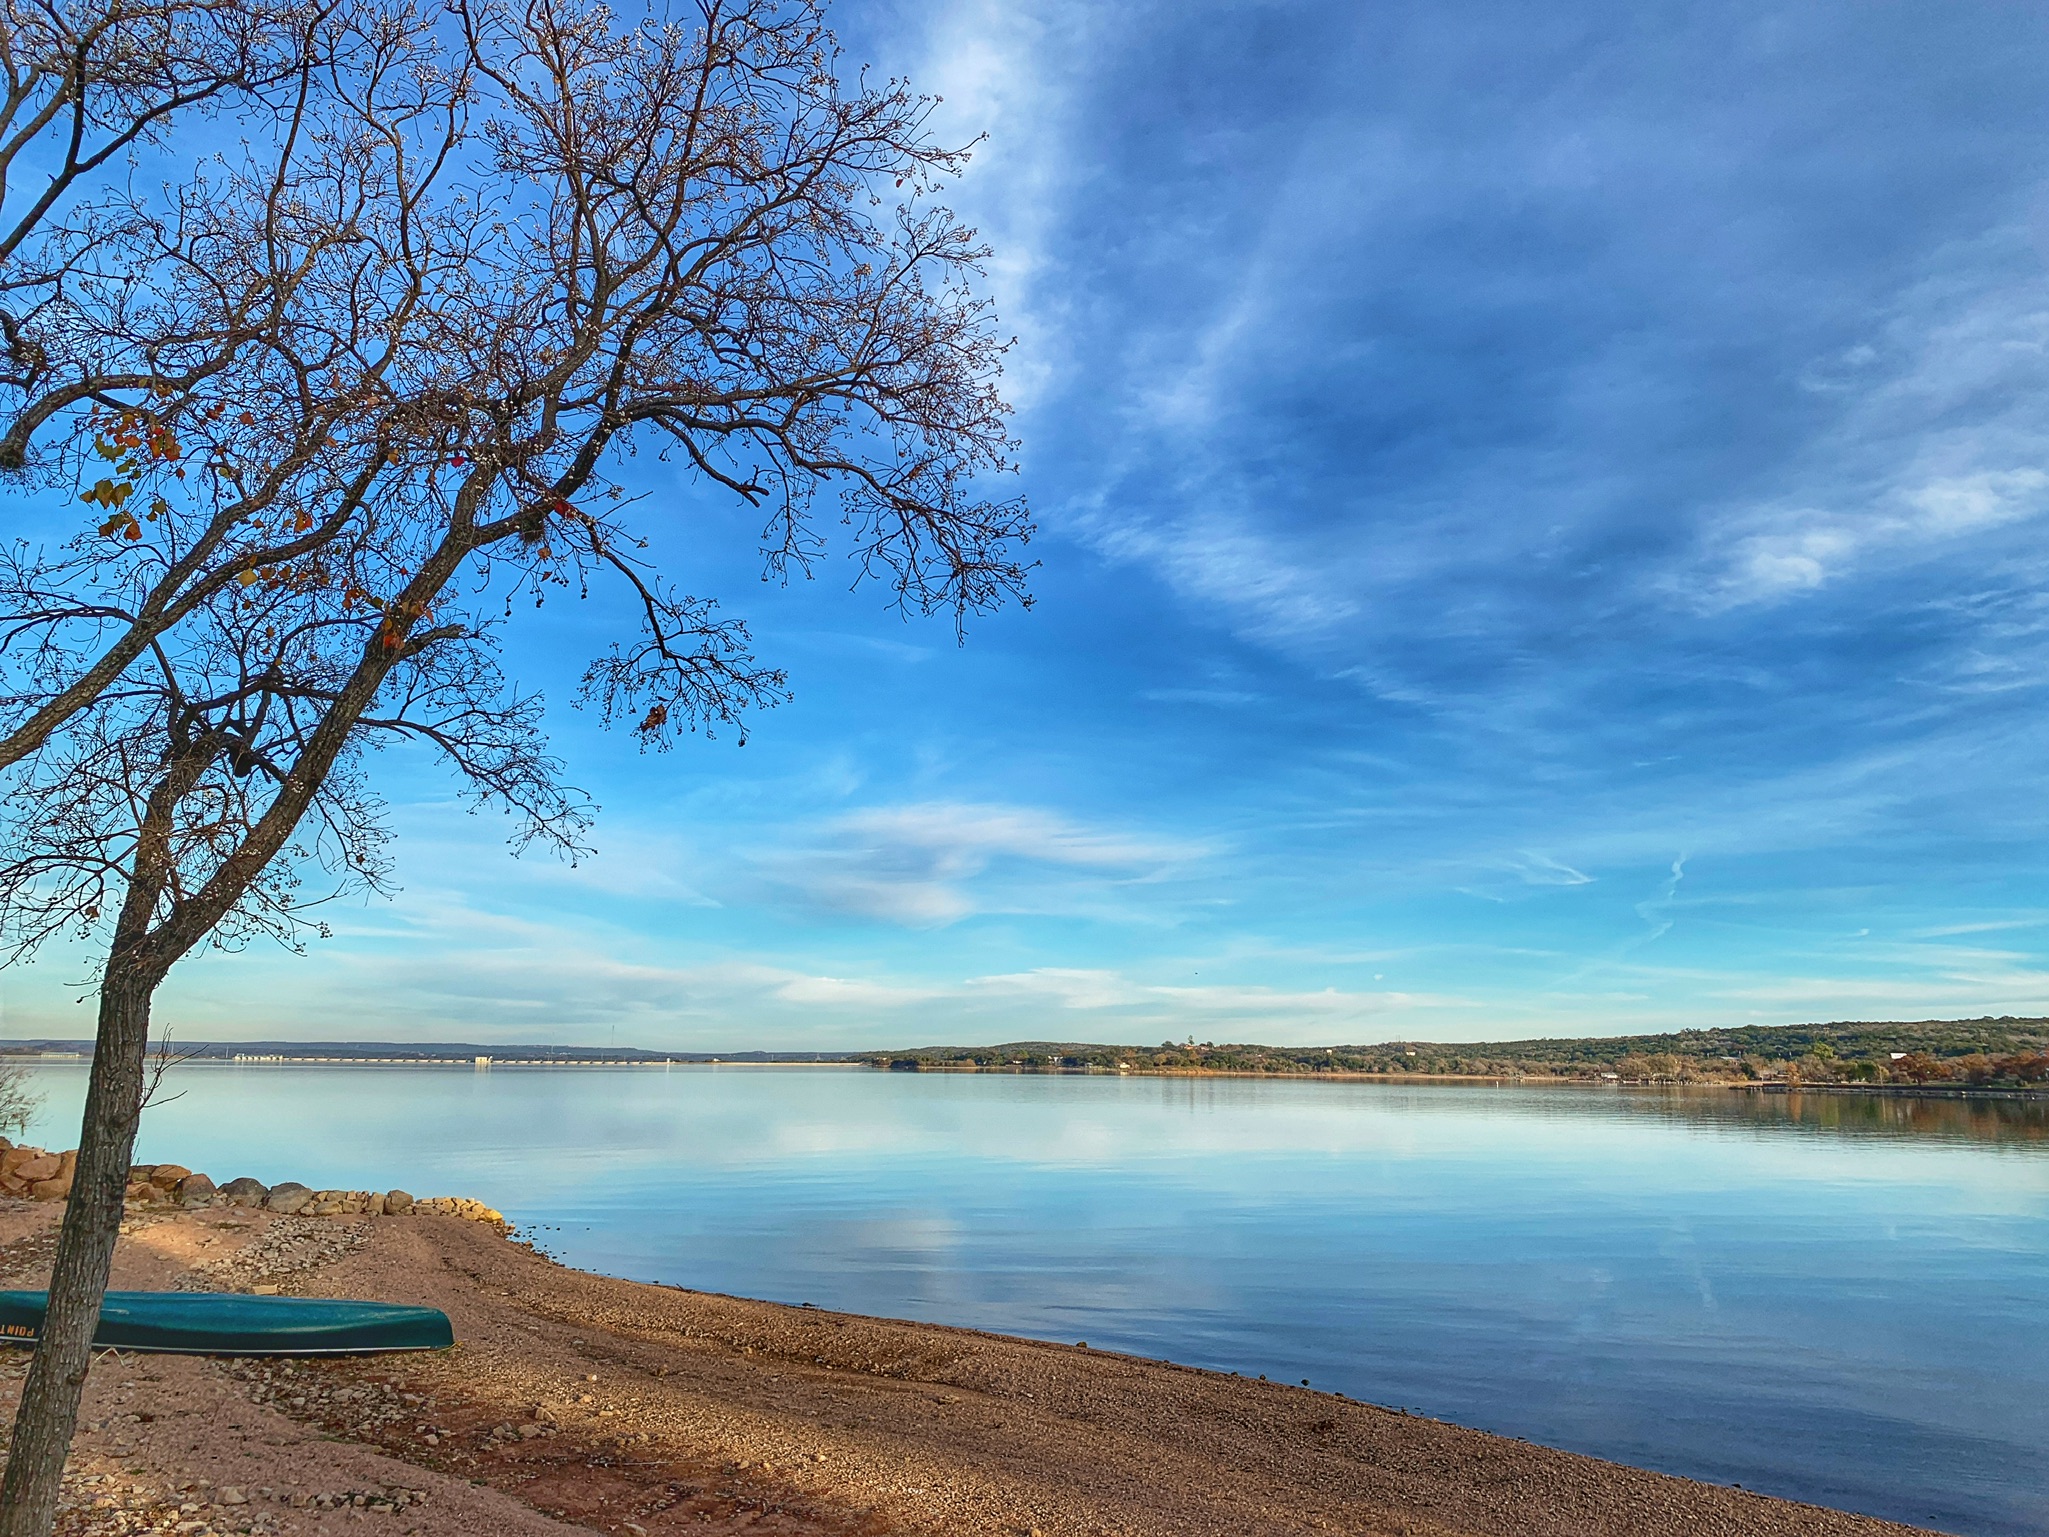 Image of Lake Buchanan taken from our shoreline at Willow Point!